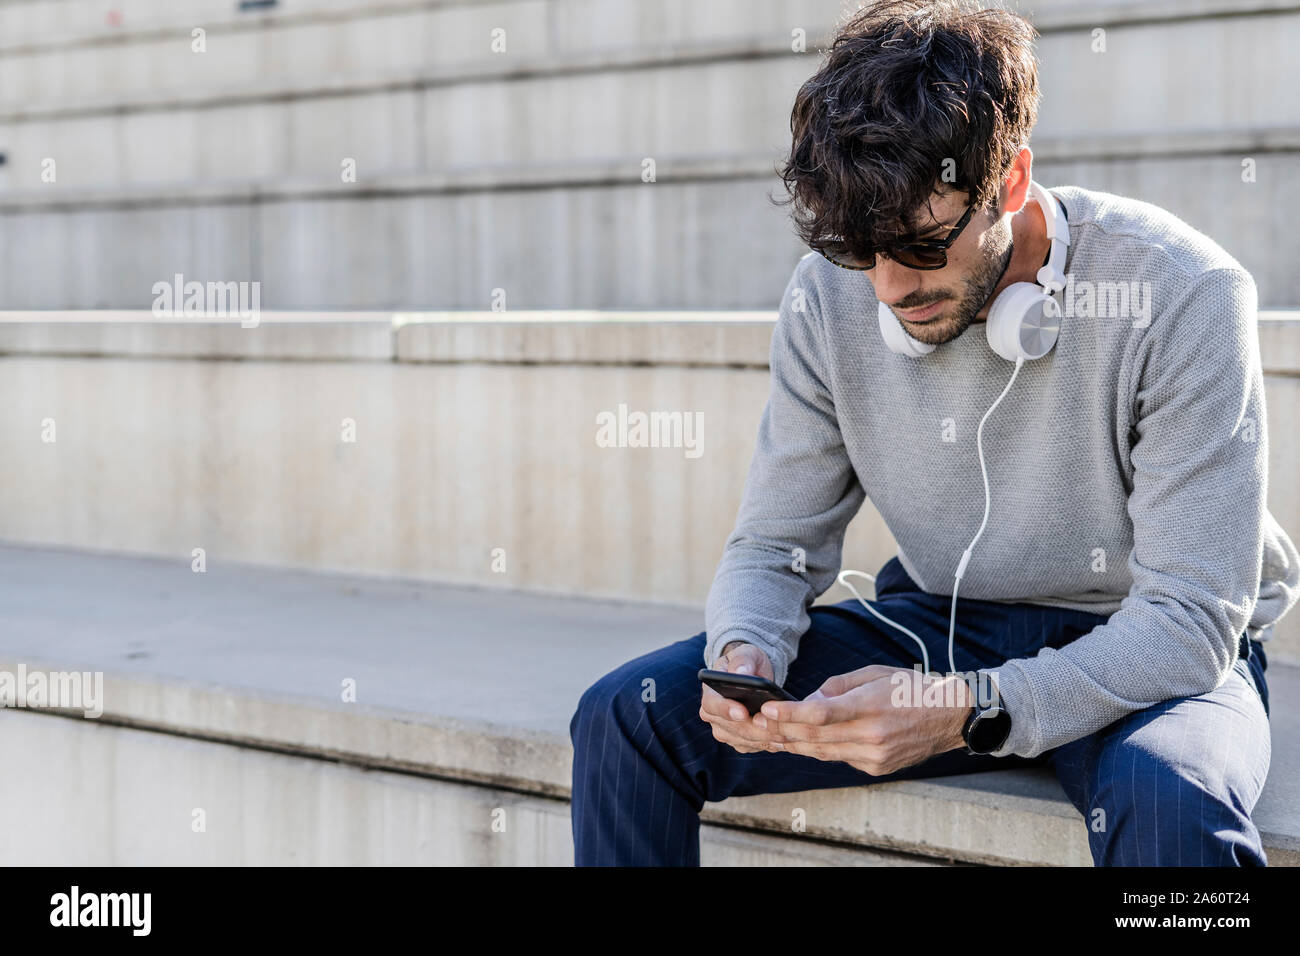 Man sitting on outdoor stairs using smartphone Stock Photo